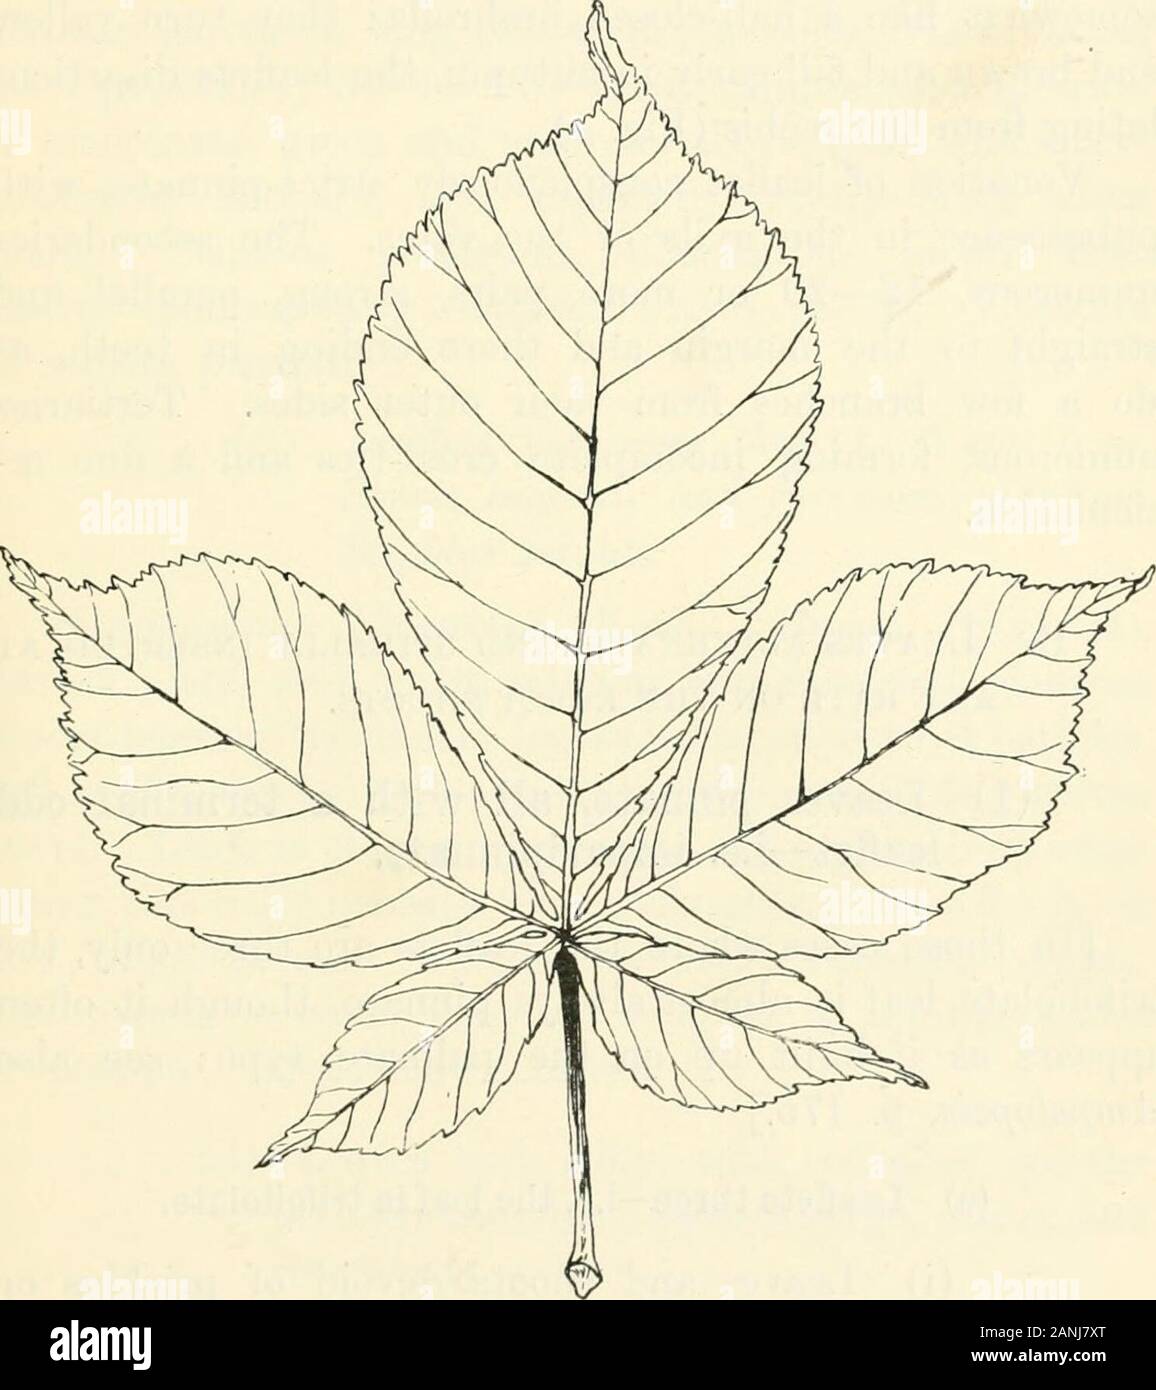 Trees; a handbook of forest-botany for the woodlands and the laboratory . Fig. 32. Leaflet of Ash, Fraxima excelsior, p. 154 (Ett). HORSE-CHESTNUT 157 (2) Leaves palmately compound, digitate, ex-stipulate. jEsculus Hippocastanum, L. Horse-chestnut (Fig. 33).Large tree with stout shoots, and large digitate leaveson a long petiole with broad insertions and prominent. Fig. 33. Horse-chestnut, Msculut Hippocastanum, p. 157 (D). pulvinus ; exstipulate. Leaflets 7 (or rarely 5), large, thin,6—12 cm. or more long (8—20 x 4—10 cm.), obovate- 158 HORSE-CHESTNUT lanceolate, or cuneate-obovate, tapering Stock Photo